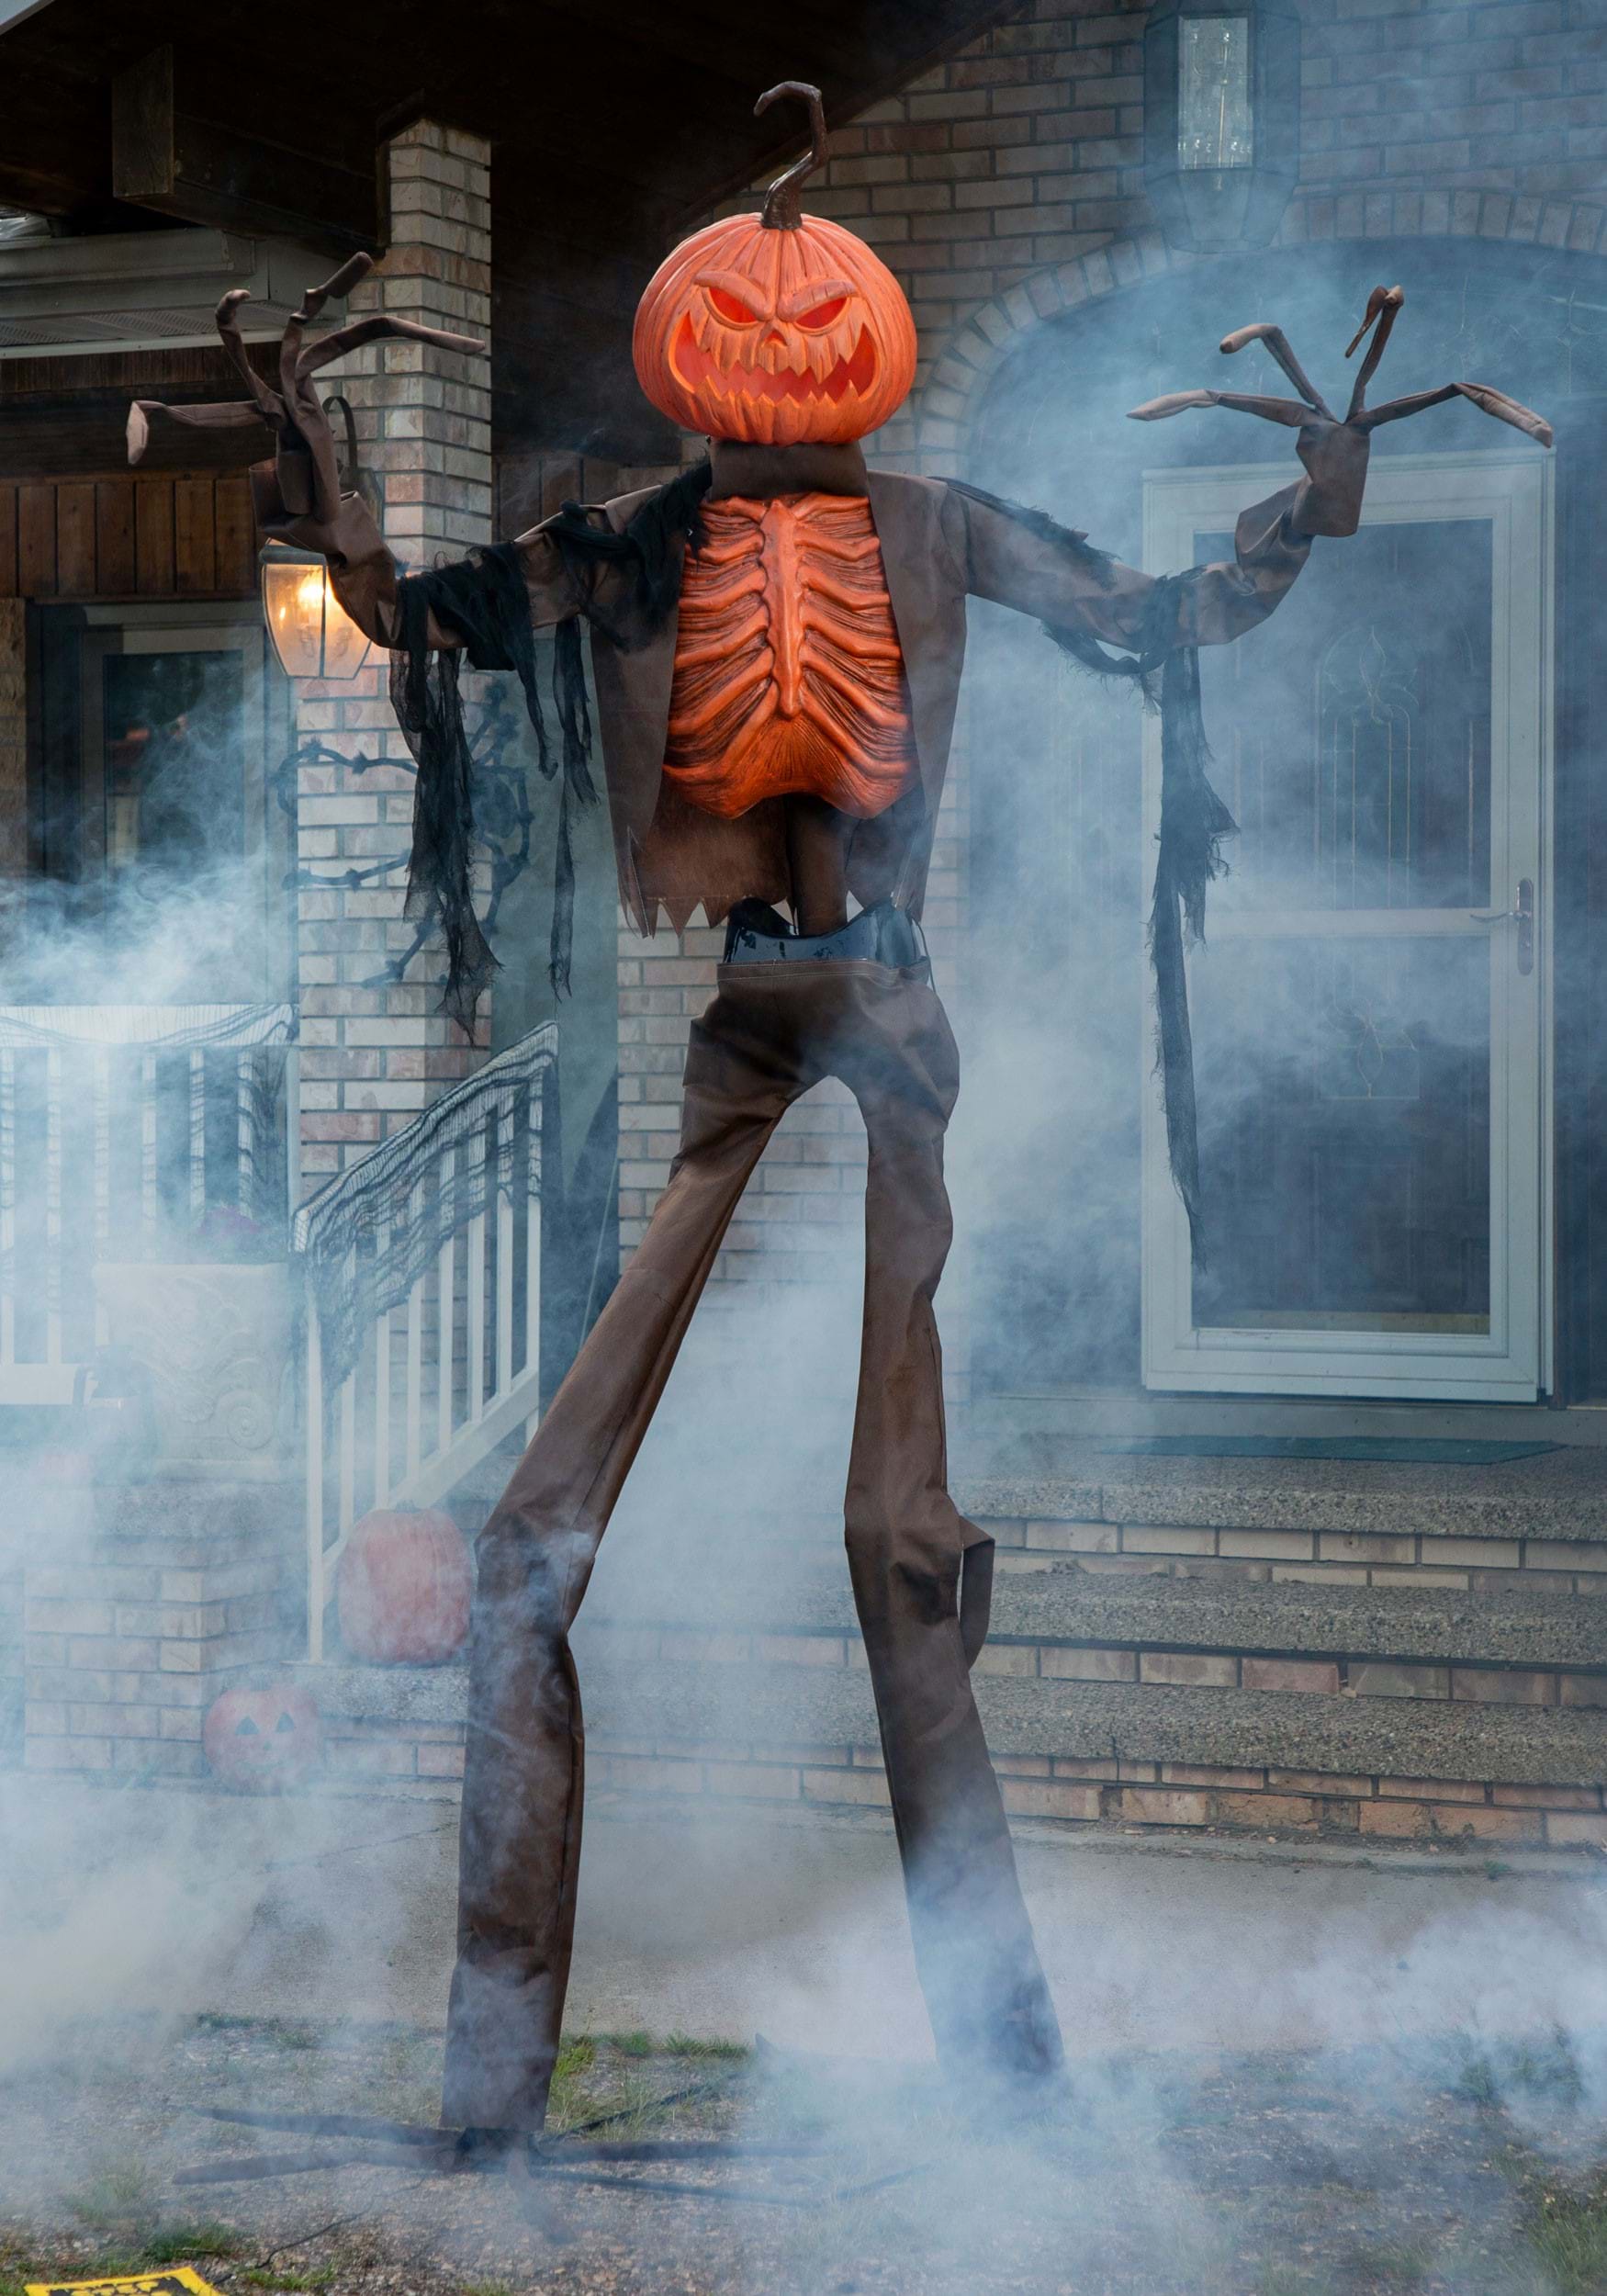 https://images.halloweencostumes.com/products/74231/1-1/8ft-animated-giant-pumpkin-scarecrow-decoration.jpg